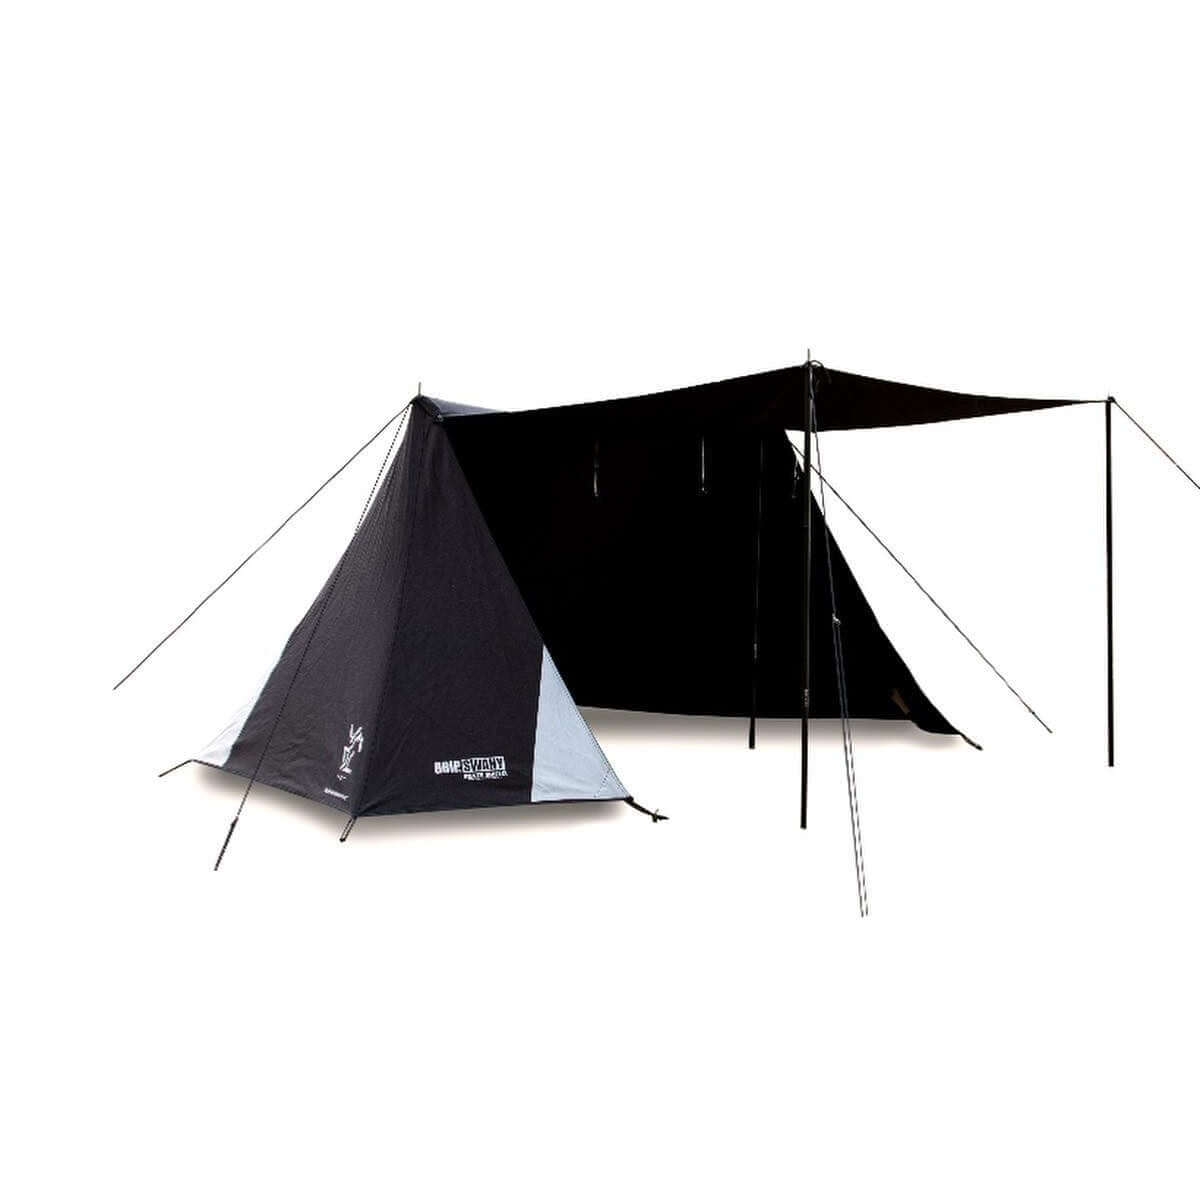 White Mountaineering × GRIP SWANY - FIREPROOF GS TENT / BLACK